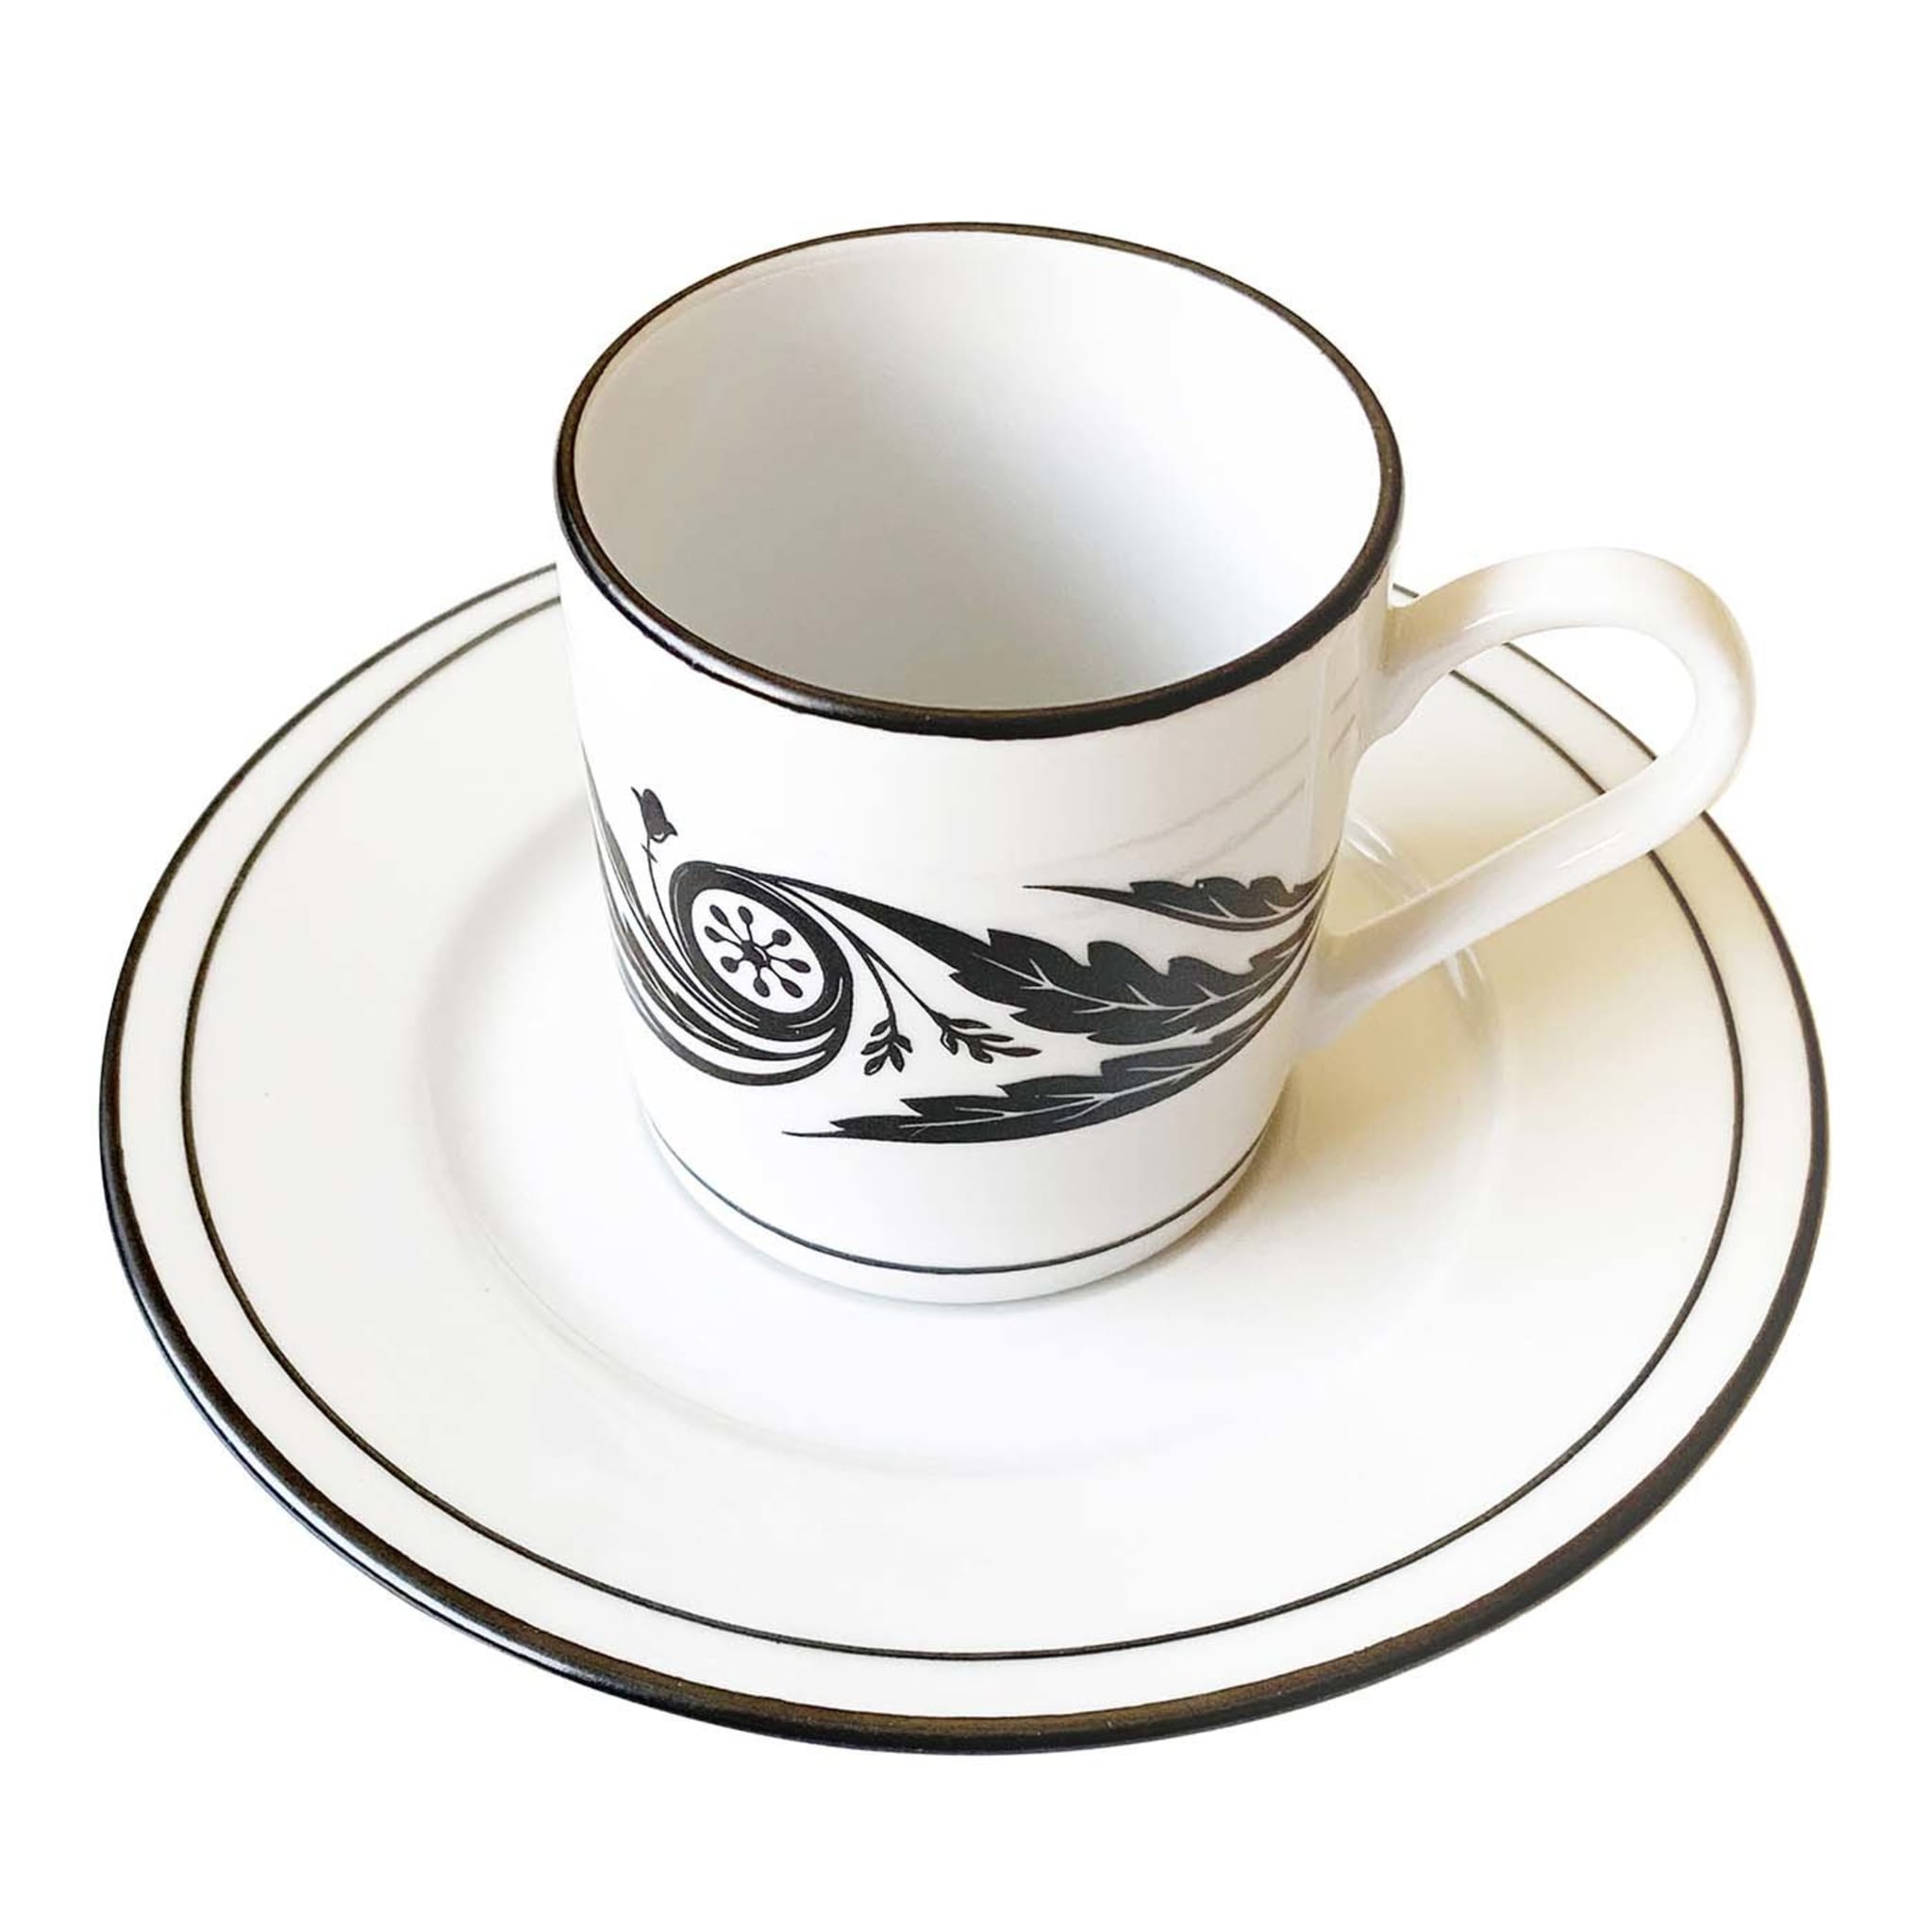 Set of 2 Crisalide Coffee Cups & Saucers - Main view